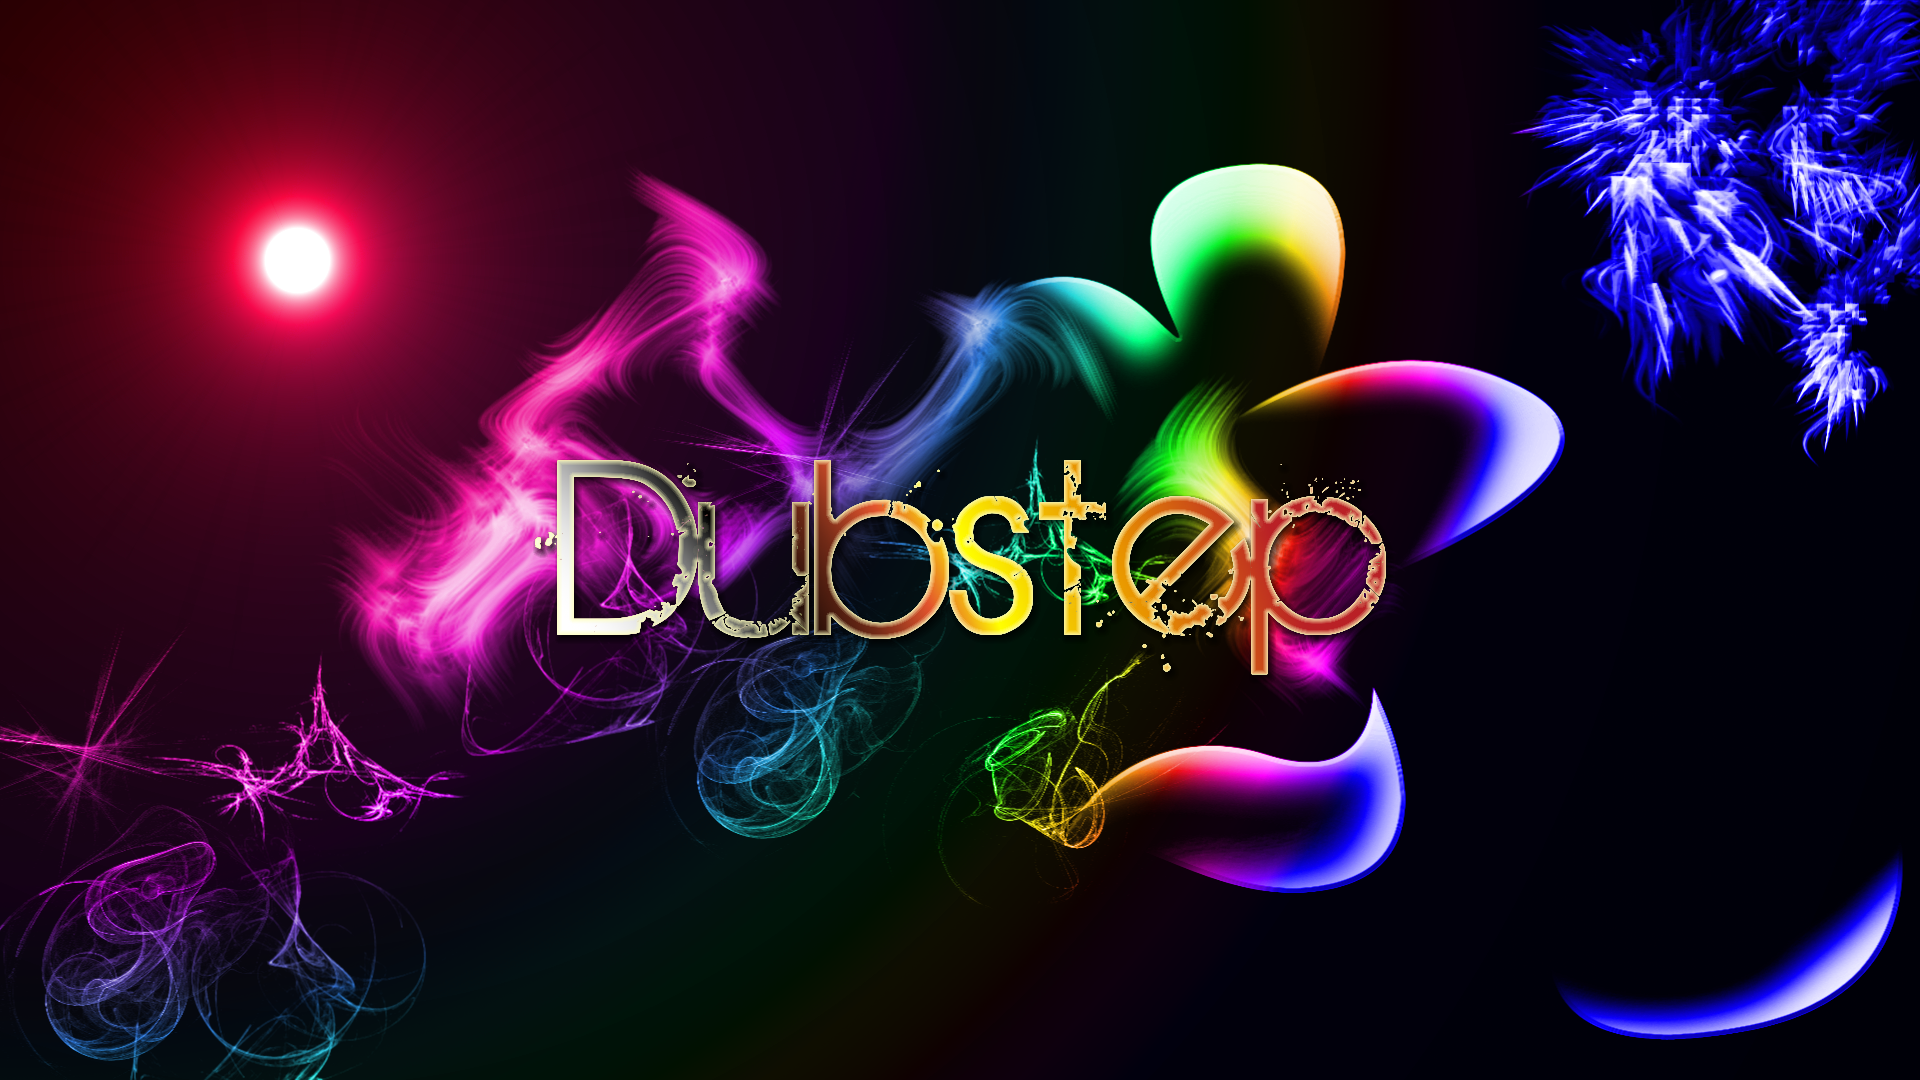 Dubstep wallpaper p hd x by xce on